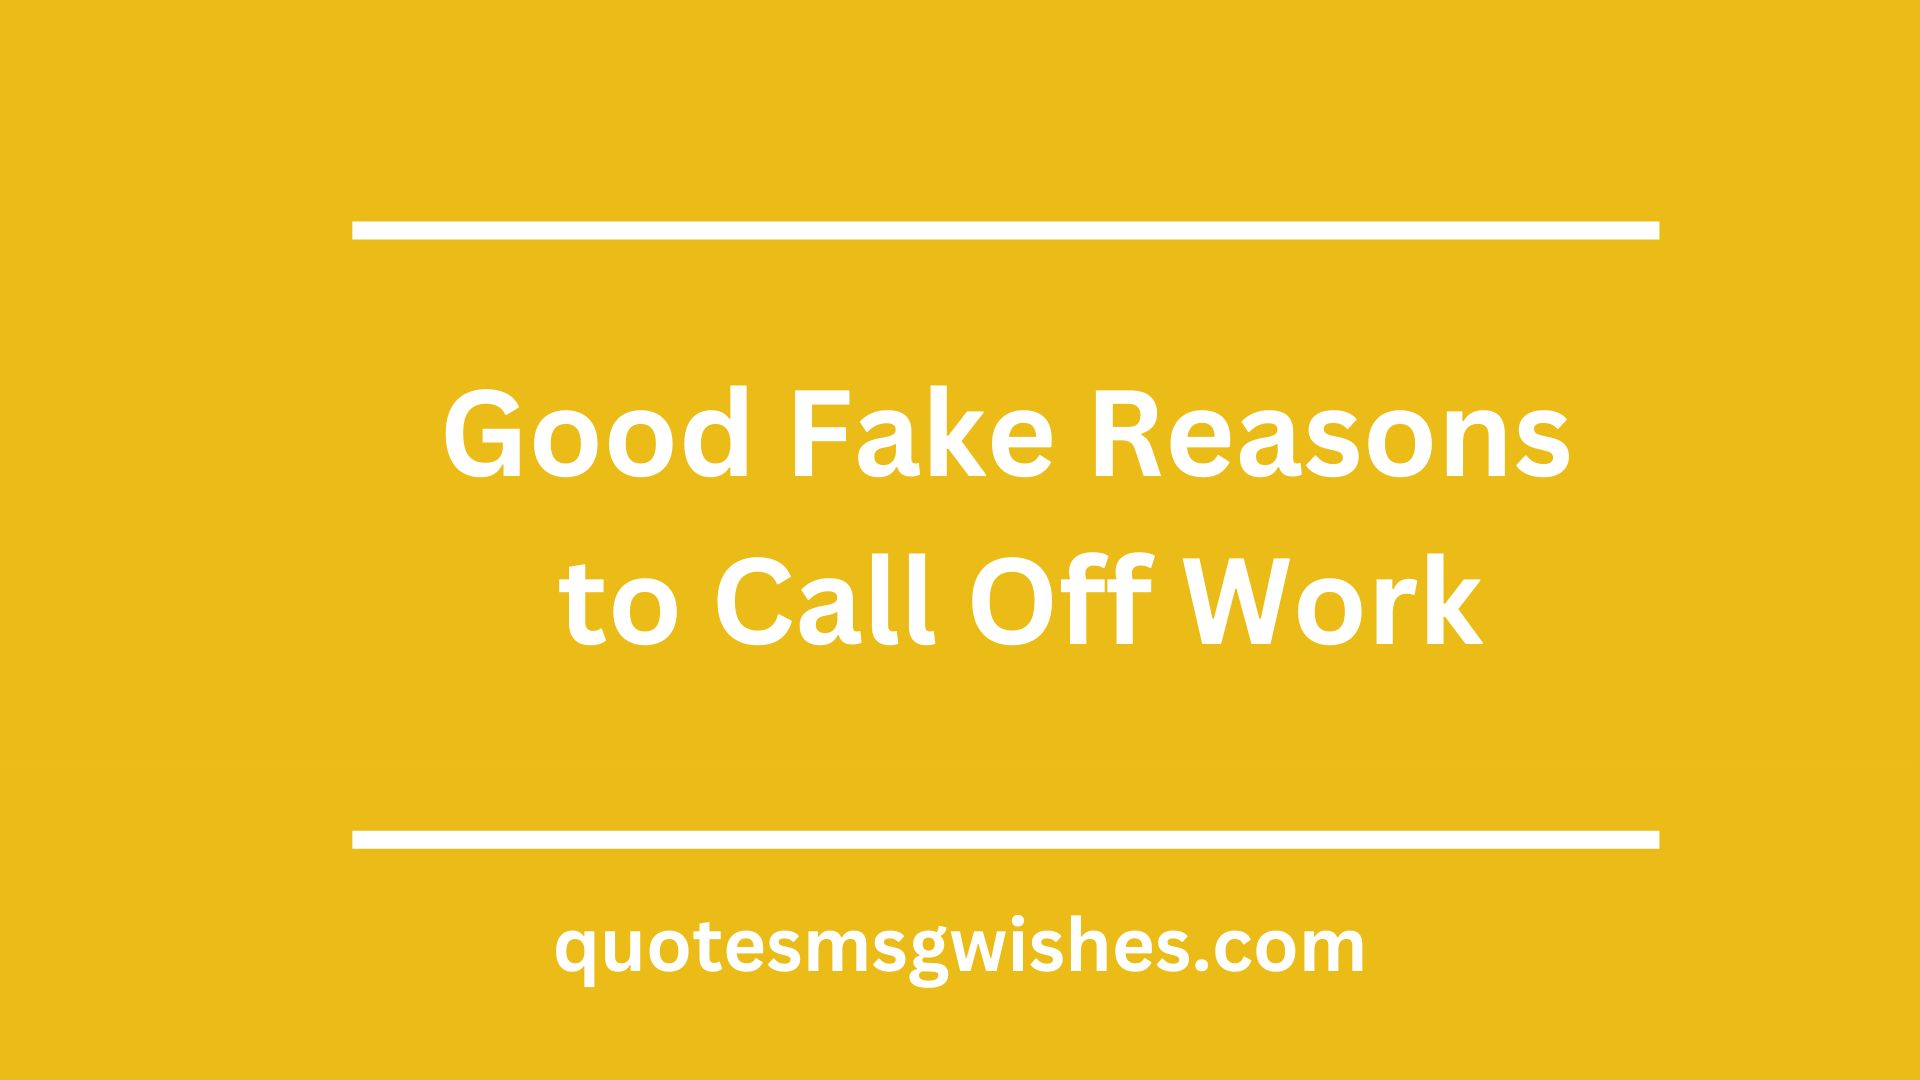 Good Fake Reasons to Call Off Work